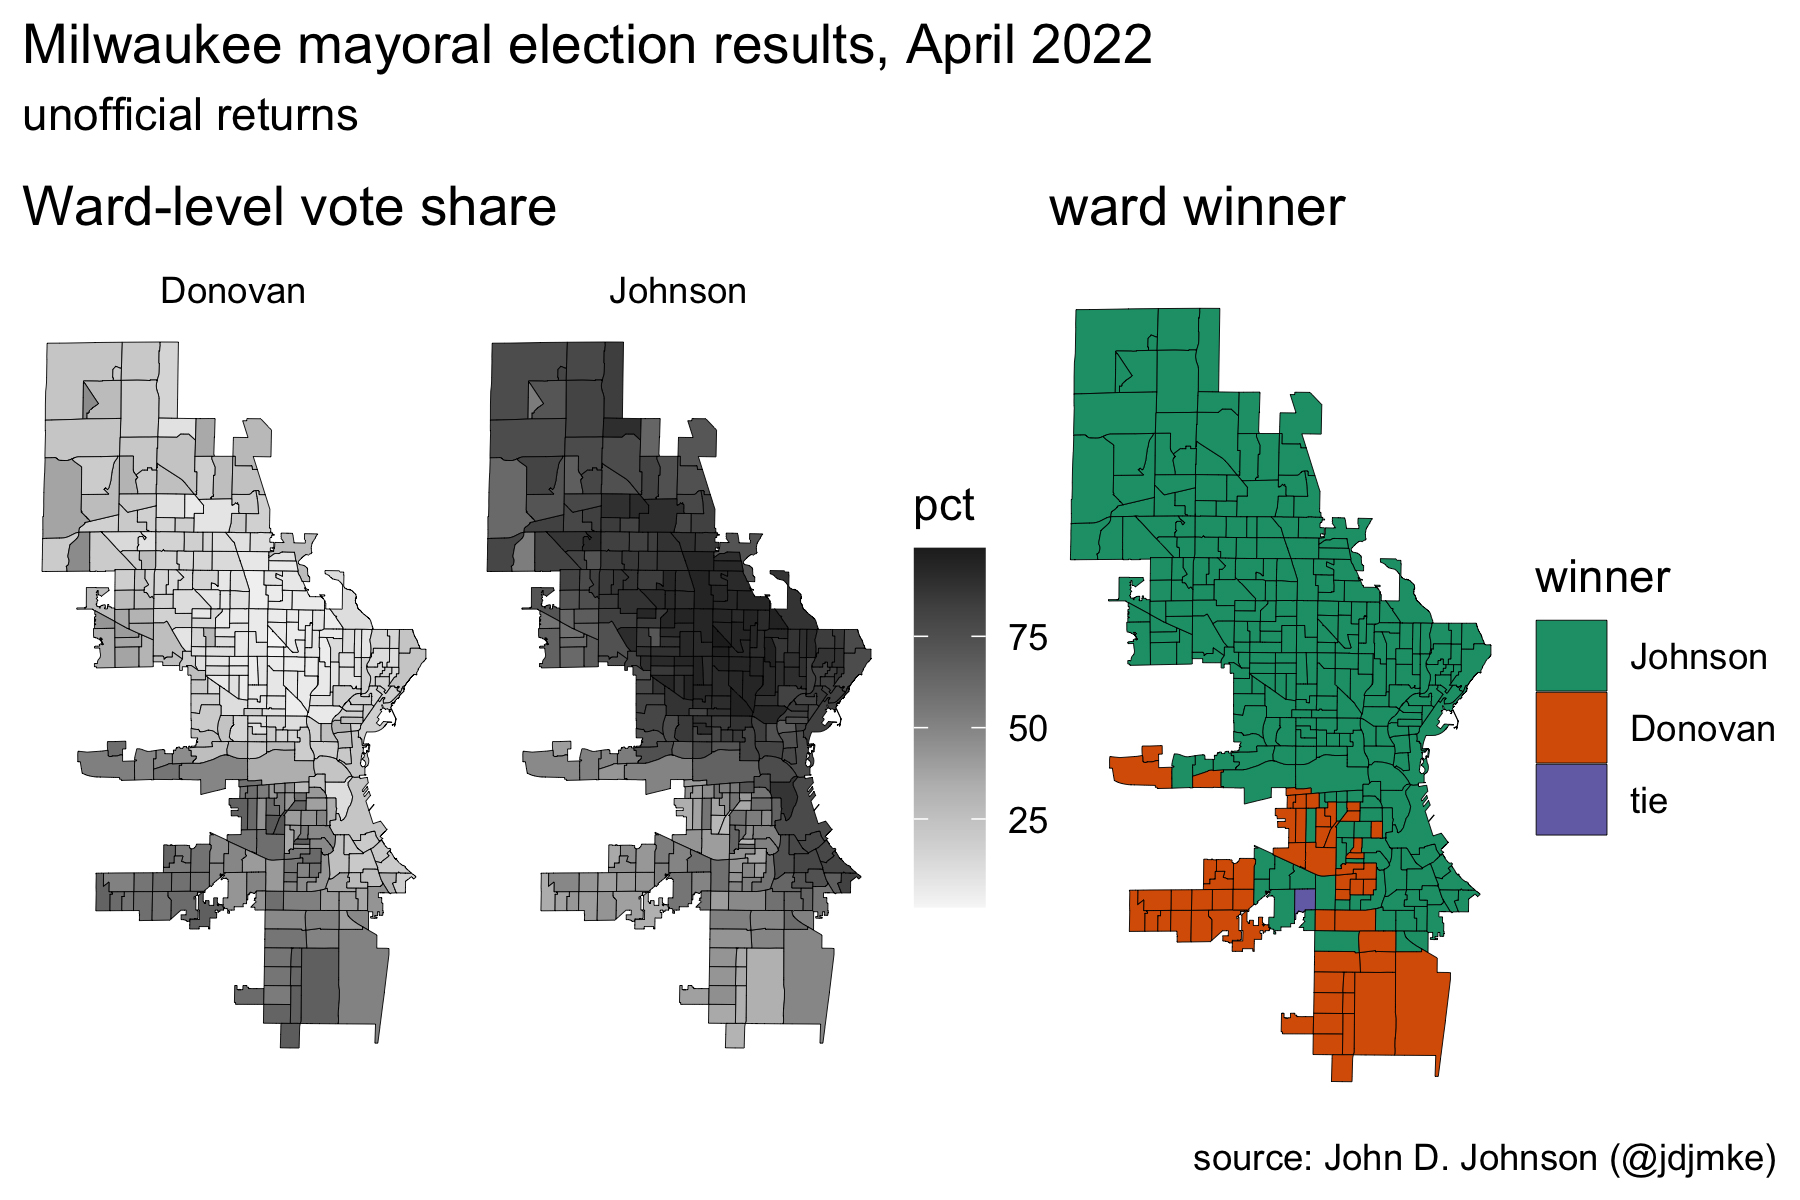 A set of maps shows unofficial results by ward in the 2022 Milwaukee mayoral election, with shading and color indicating preference for candidates Bob Donovan and Cavalier Johnson at the ward level.